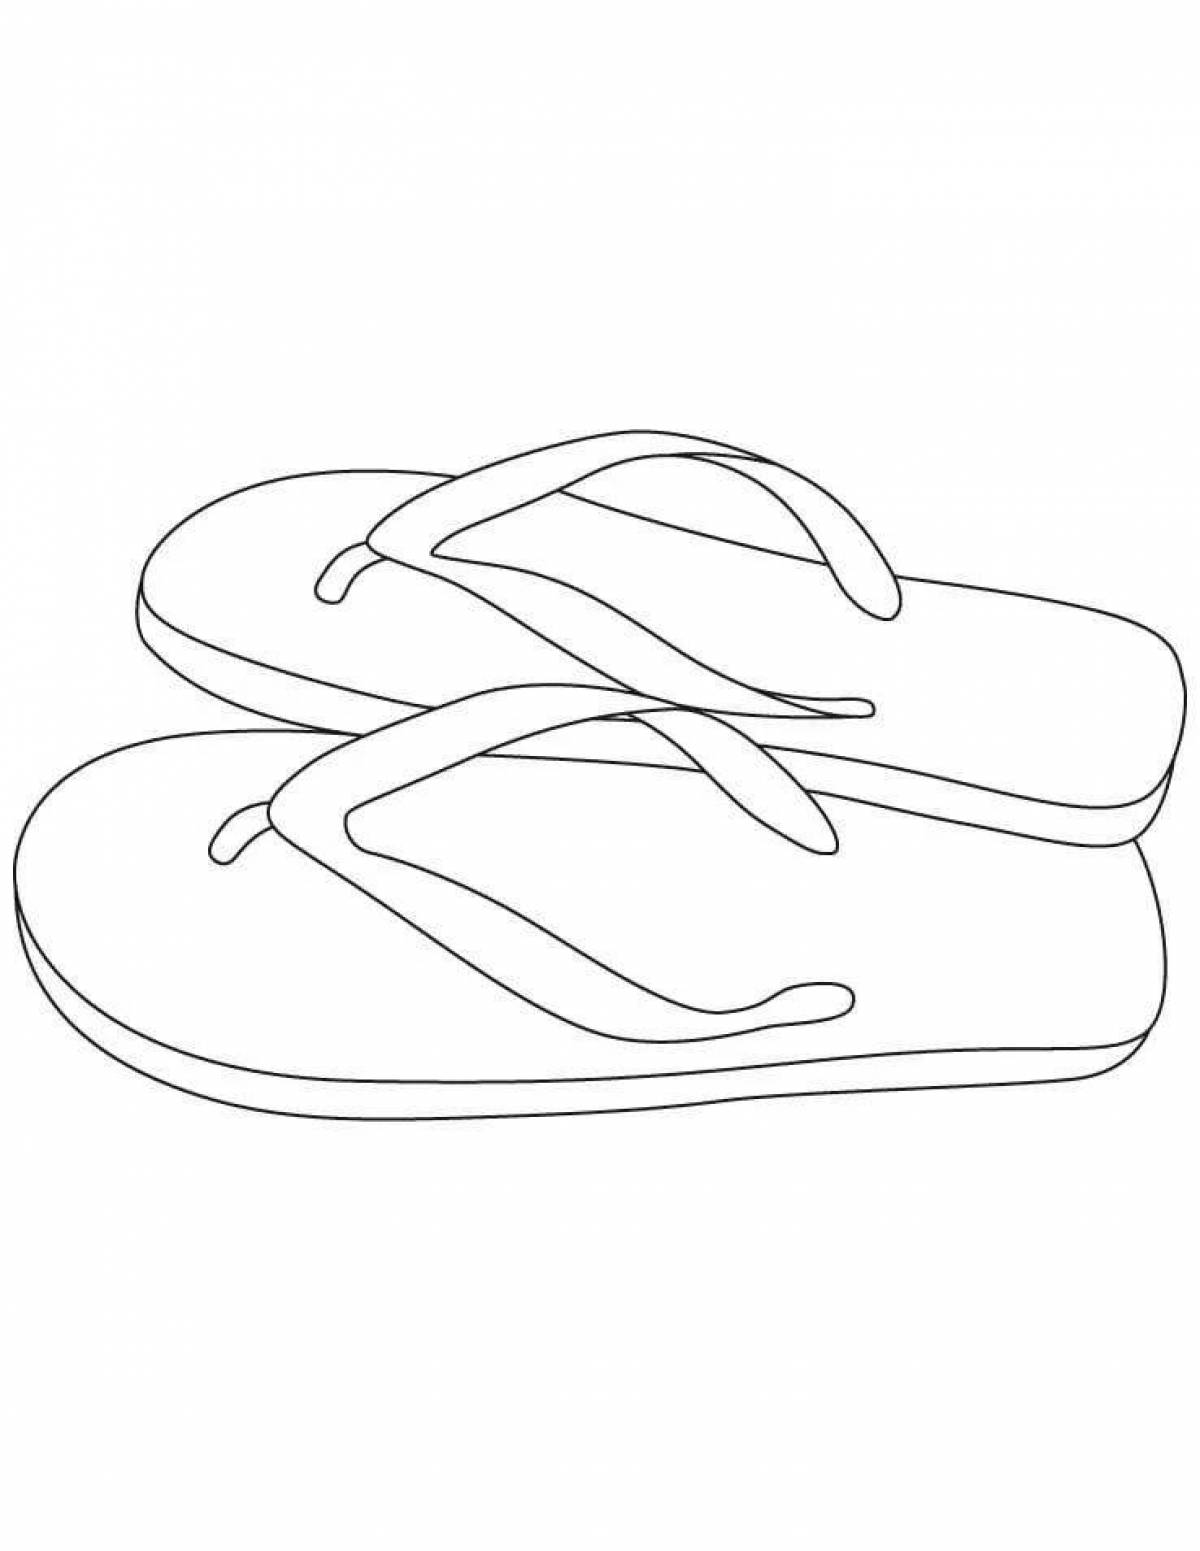 Coloring page sweet slippers